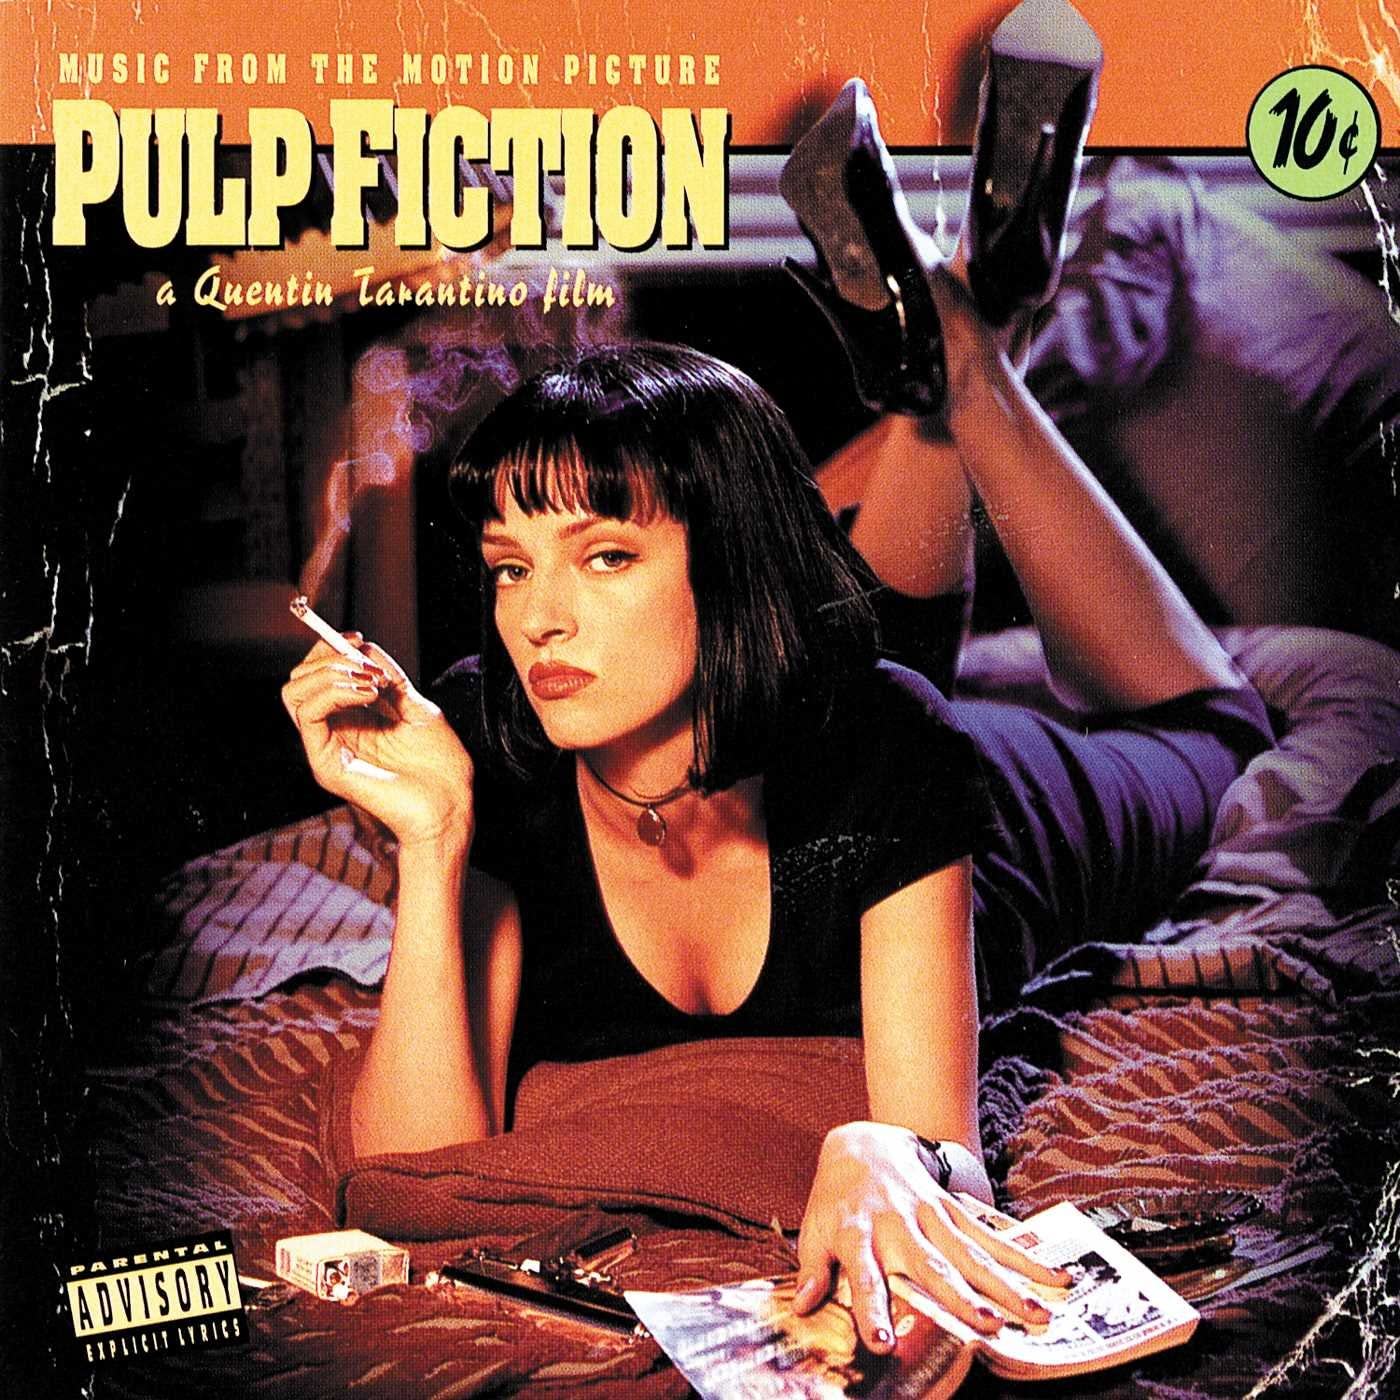 Vinyl Soundtrack to Quentin Tarantino's classic 1994 movie consisting of nine songs from the movie, four tracks of dialogue snippets followed by a song, and three tracks of dialogue alone.